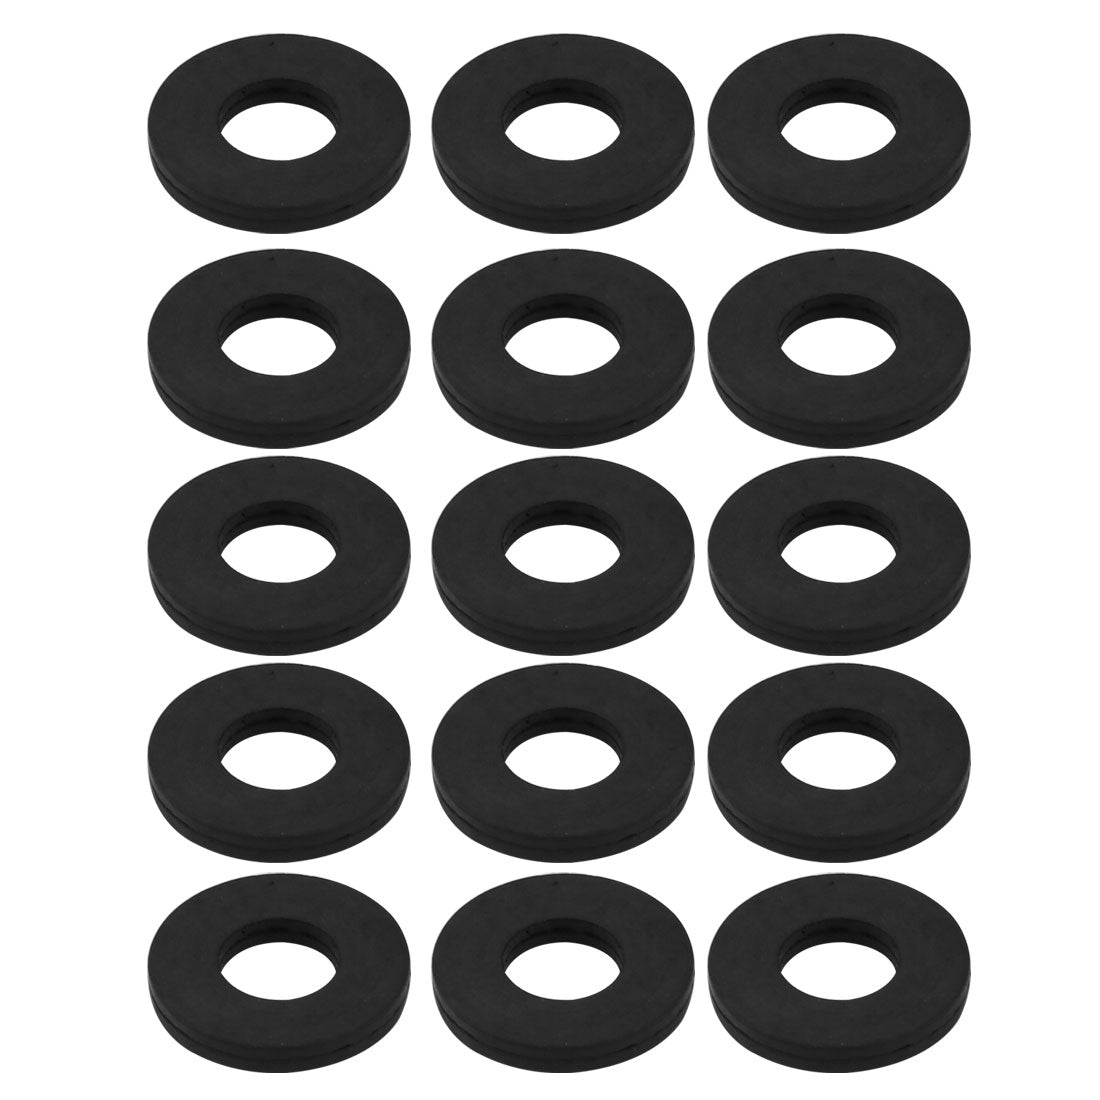 Uxcell Uxcell 15pcs Black Color Rubber Round Flat Washer Assortment Size 14x24x3mm Flat Washer